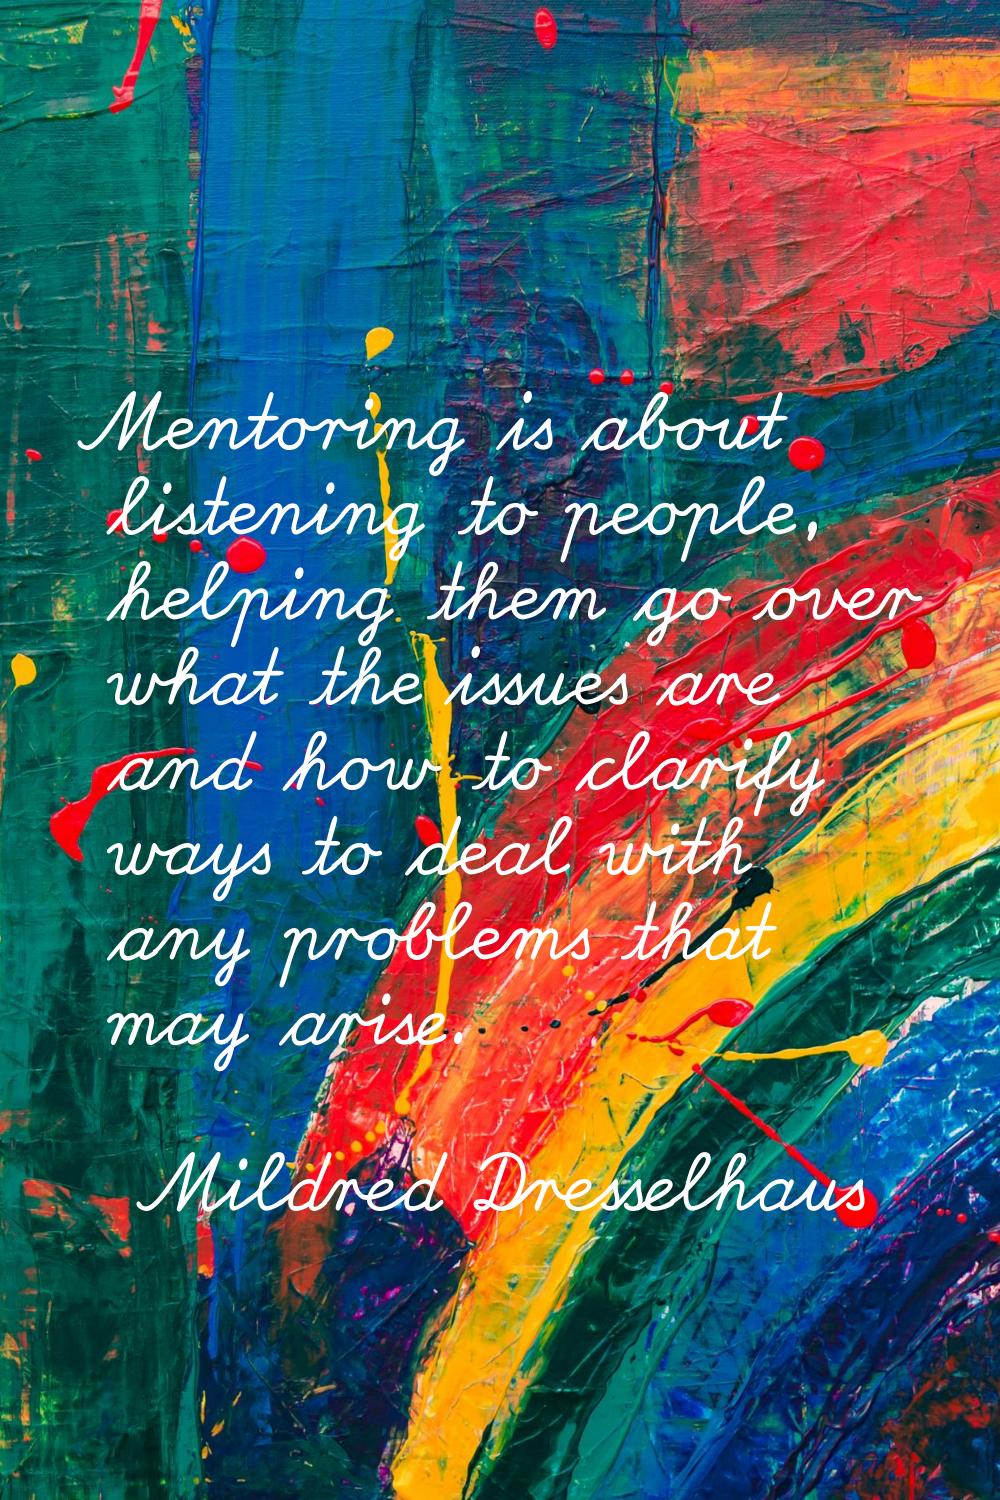 Mentoring is about listening to people, helping them go over what the issues are and how to clarify